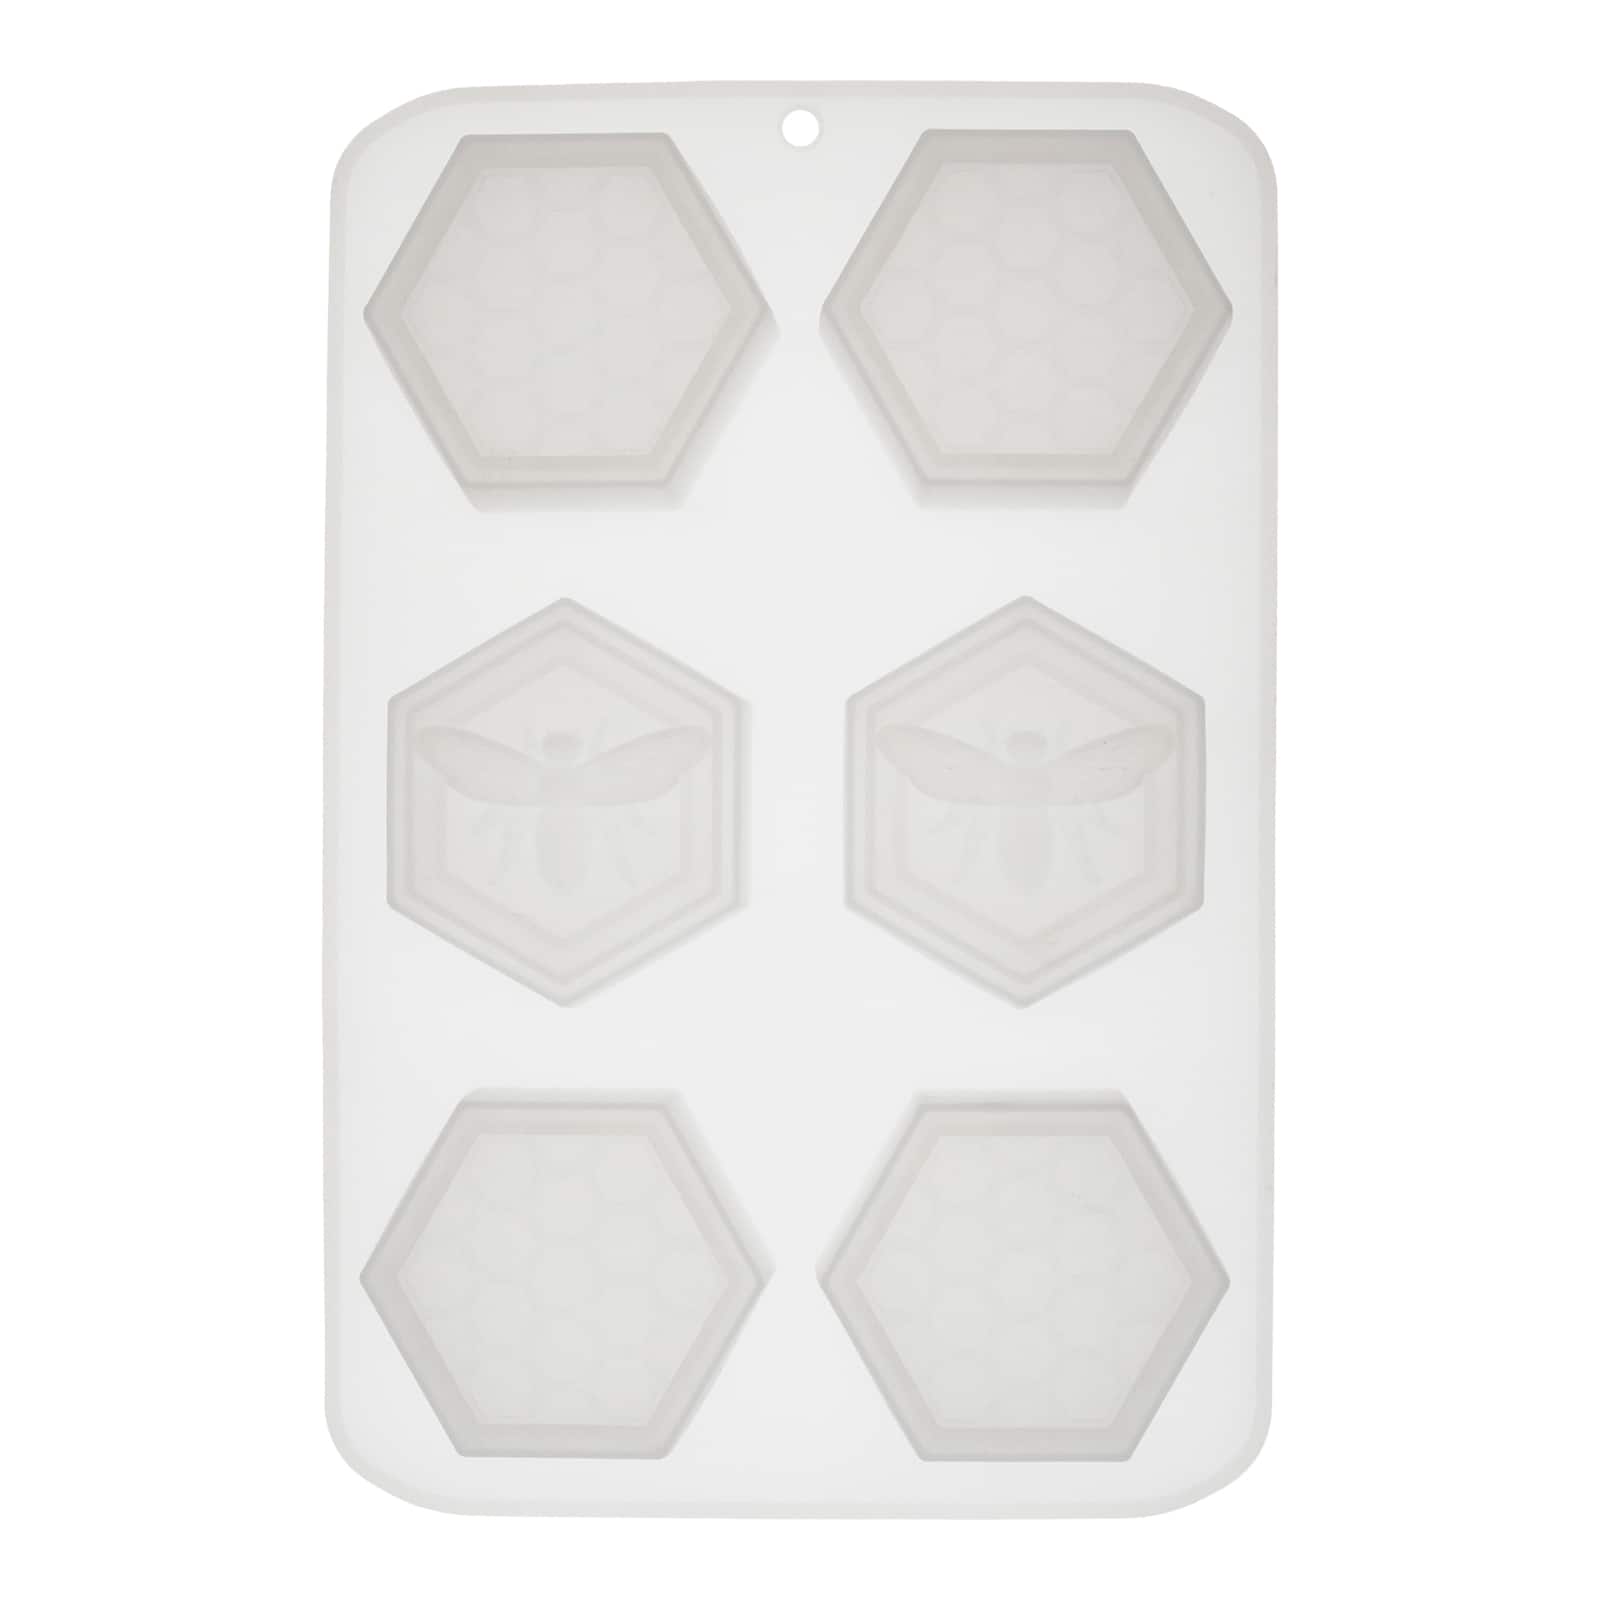 Hexagon Silicone Soap Mold | For Soap Making, Wax Melts, Wax Tarts, and  More 1 pc Mold